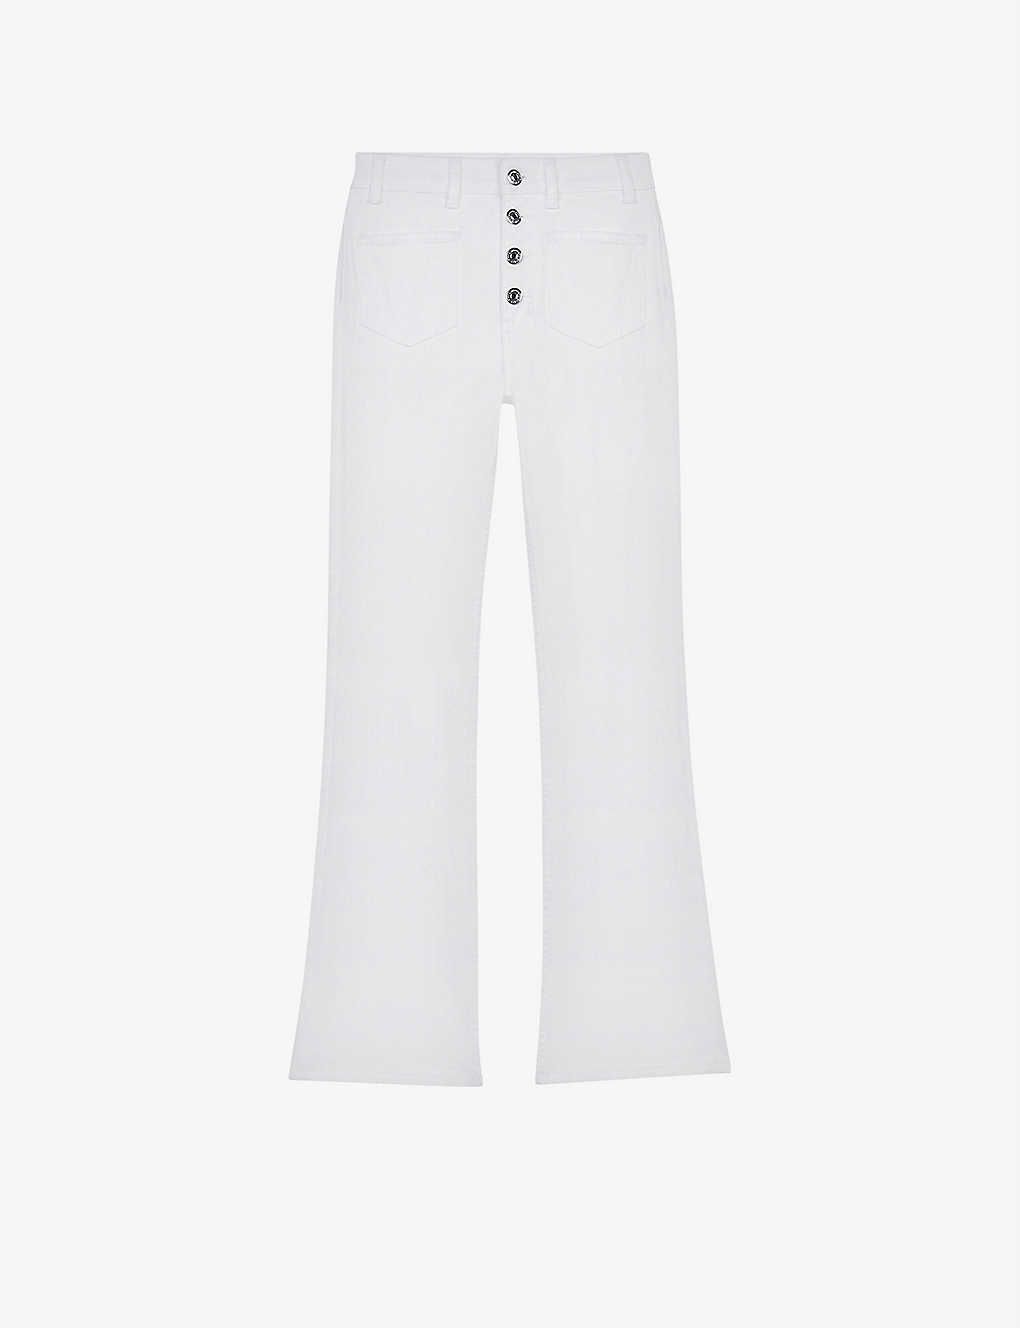 Best white jeans for women: 10 white denim pairs to shop in 2022